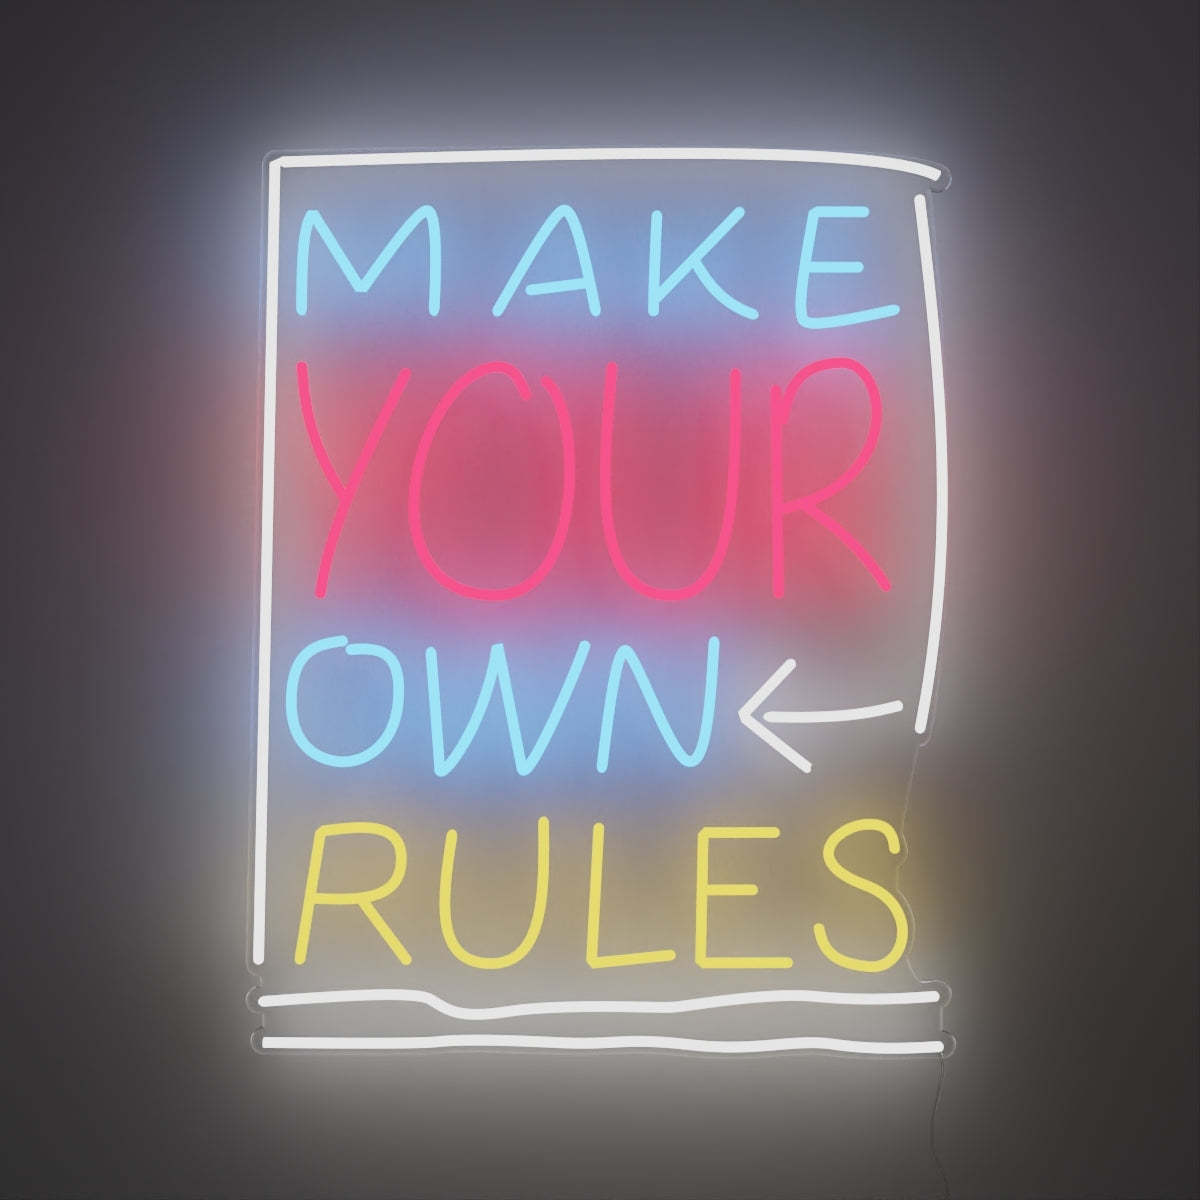 We made a custom neon sign from TikTok-famous brand Yellowpop